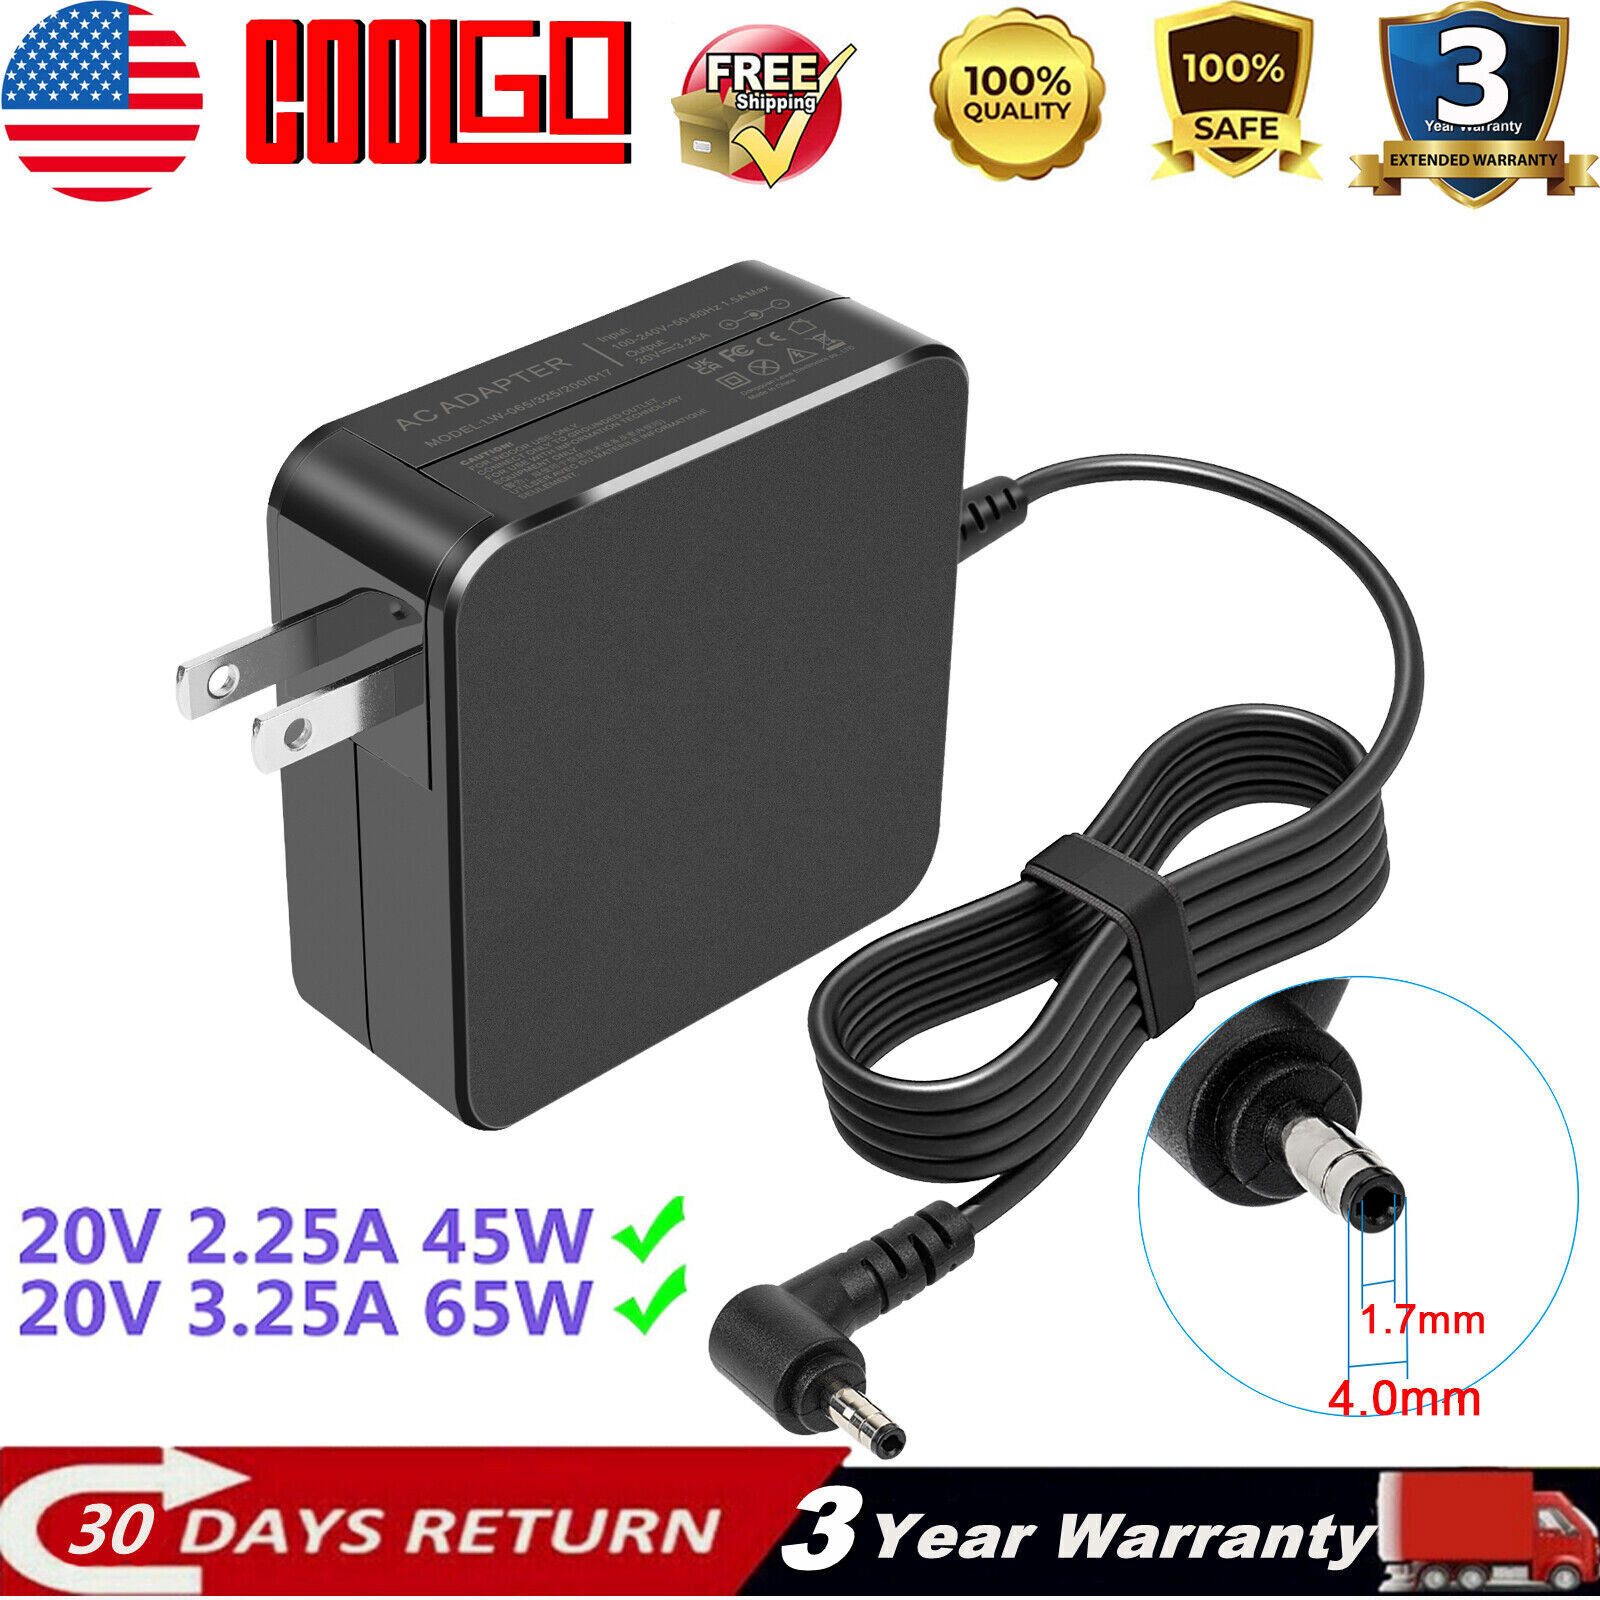 65w AC Charger Adapter for Lenovo IdeaPad 310 320 330 330s Laptop Power Supply